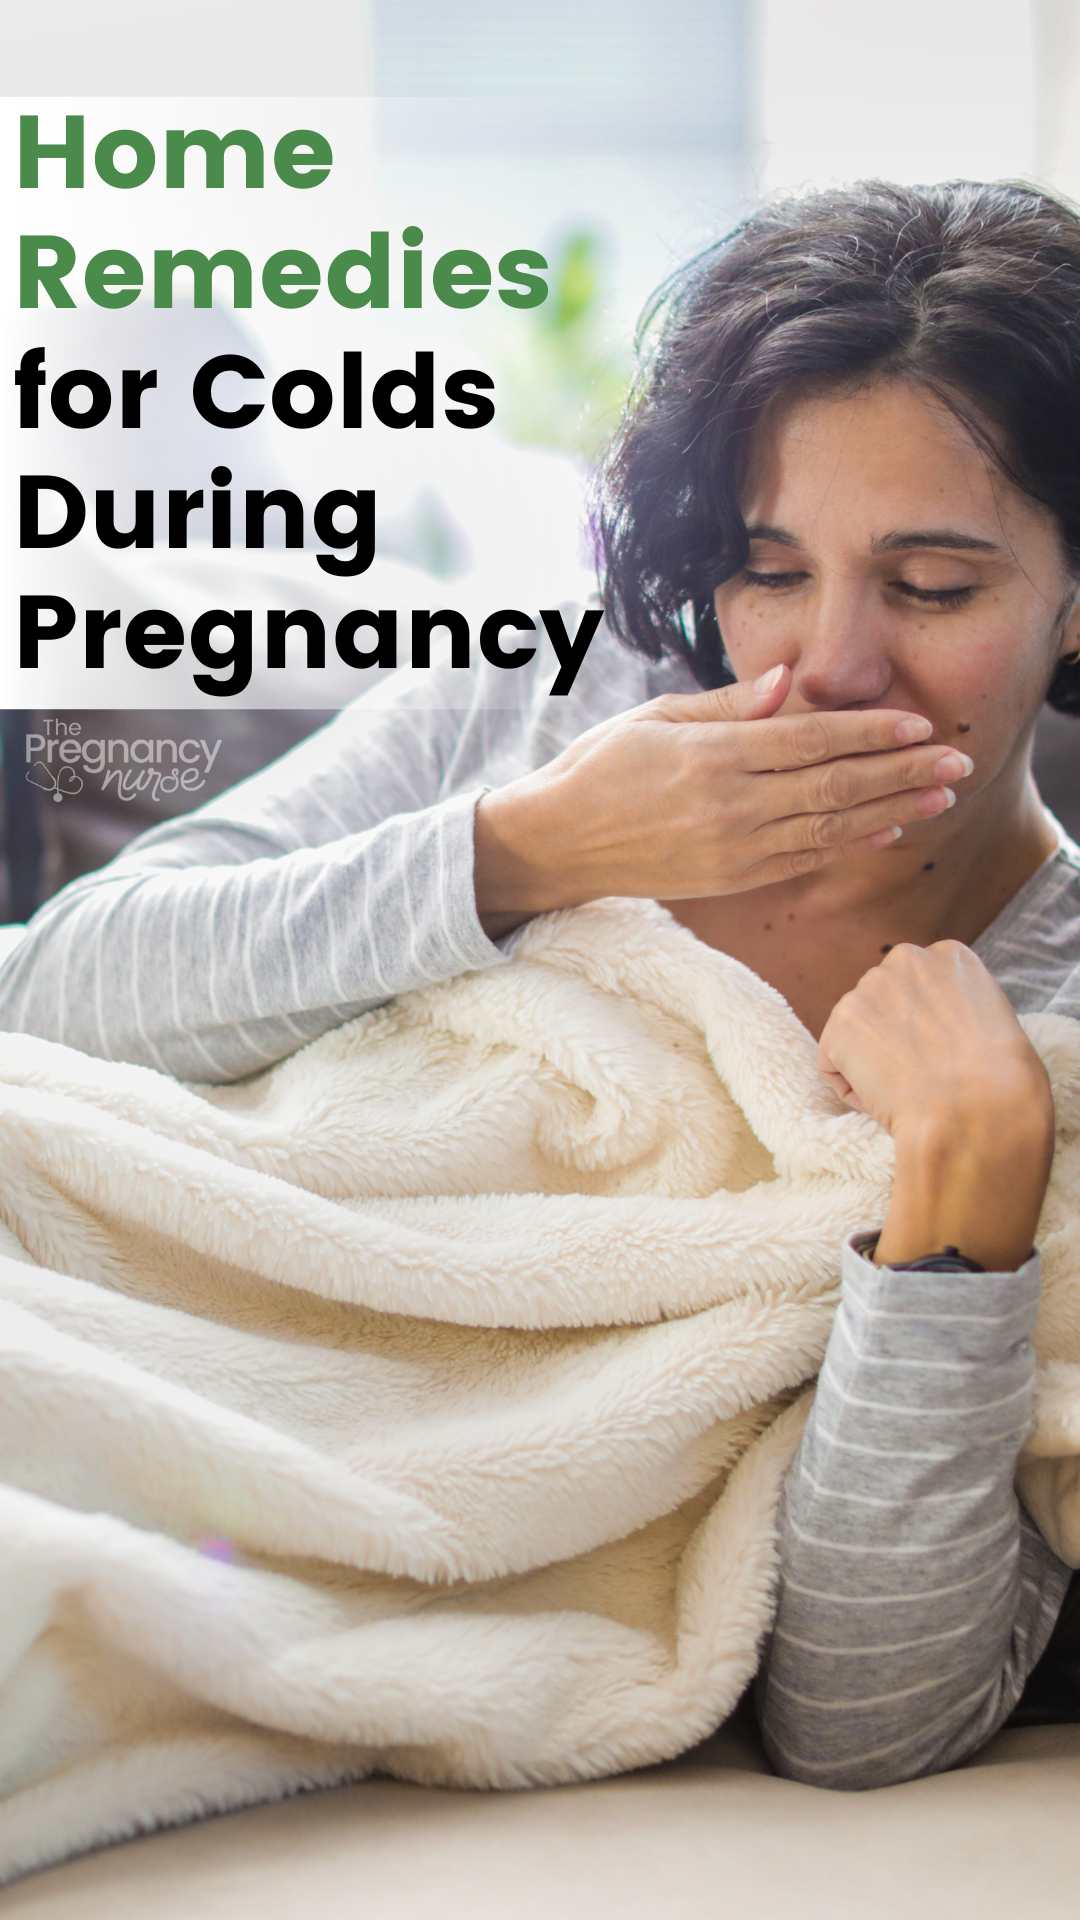 Having a cold while pregnant can be tough, but don't worry there are natural remedies that can help. This article includes 12 different home remedies that you can use to ease your discomfort and make life a little easier. From drinking lots of fluids to using essential oils, these remedies will help you feel better fast. Don't stress over being sick during pregnancy, try some of these tips today!